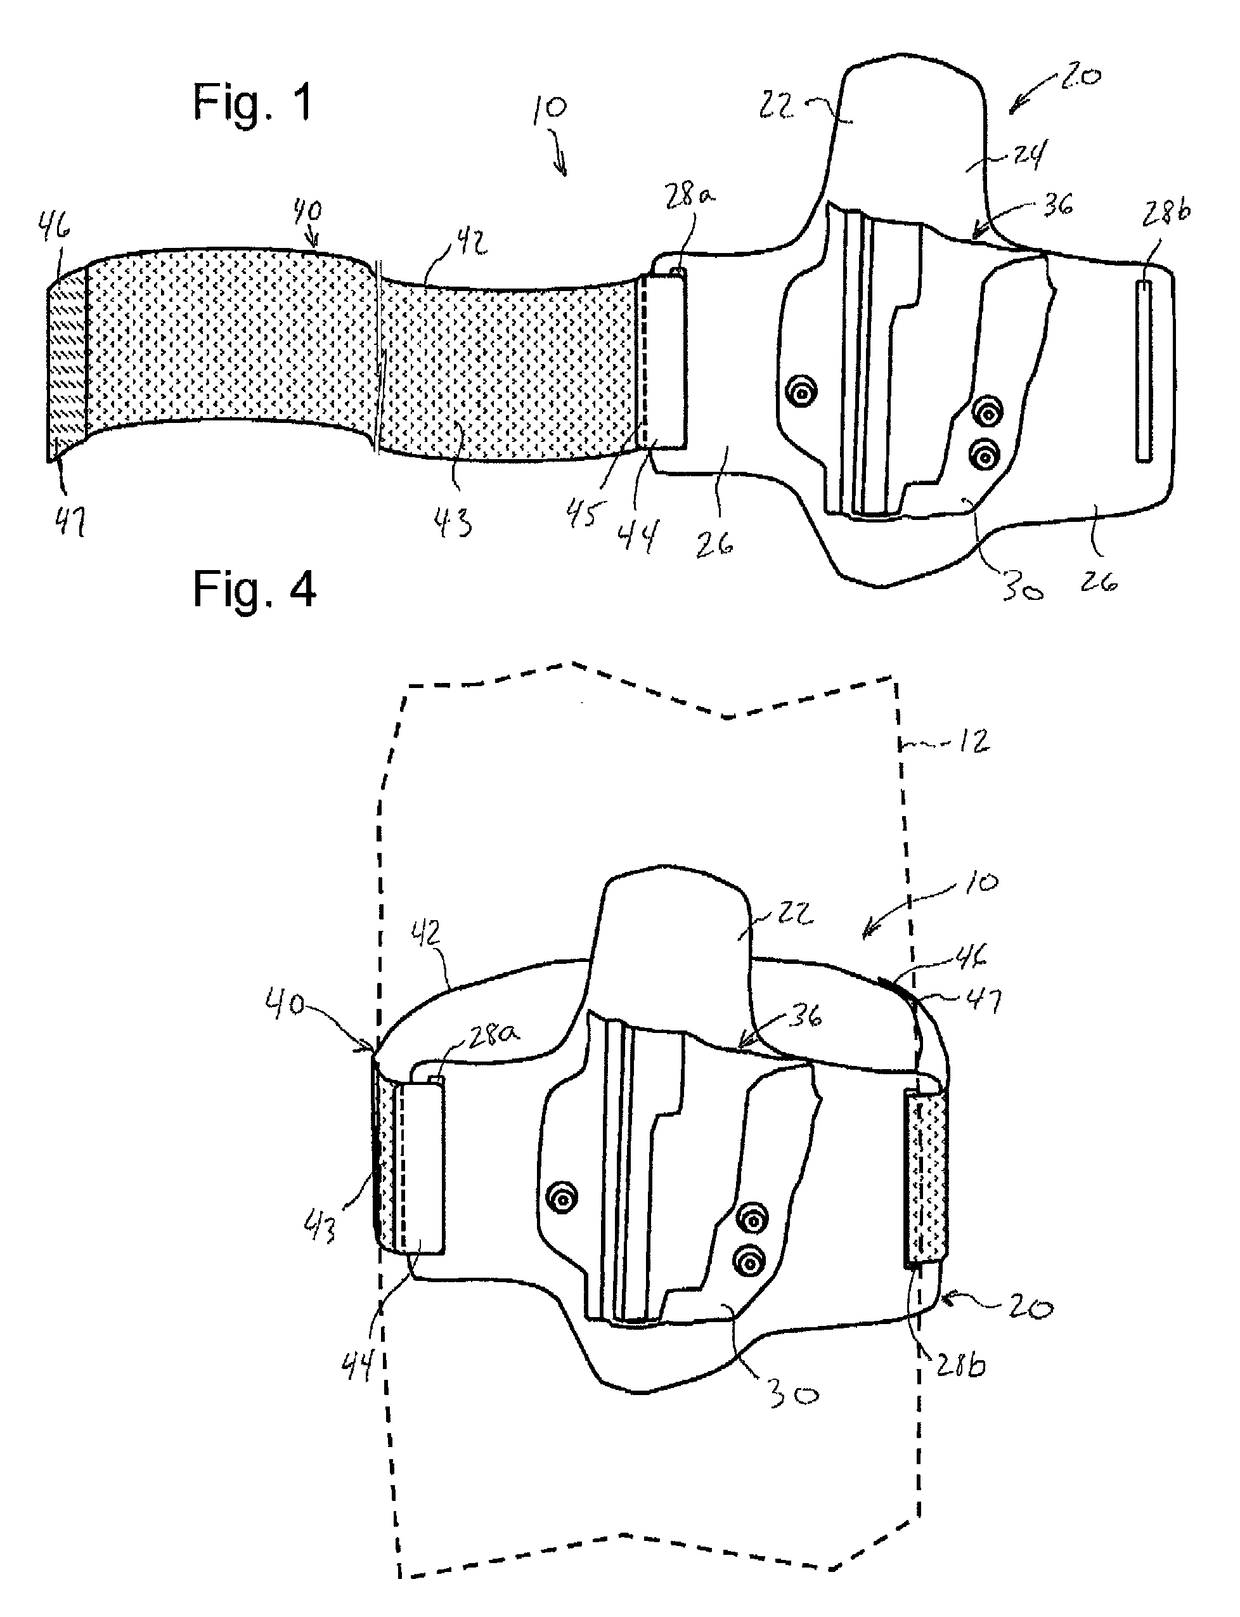 Concealed holster assembly